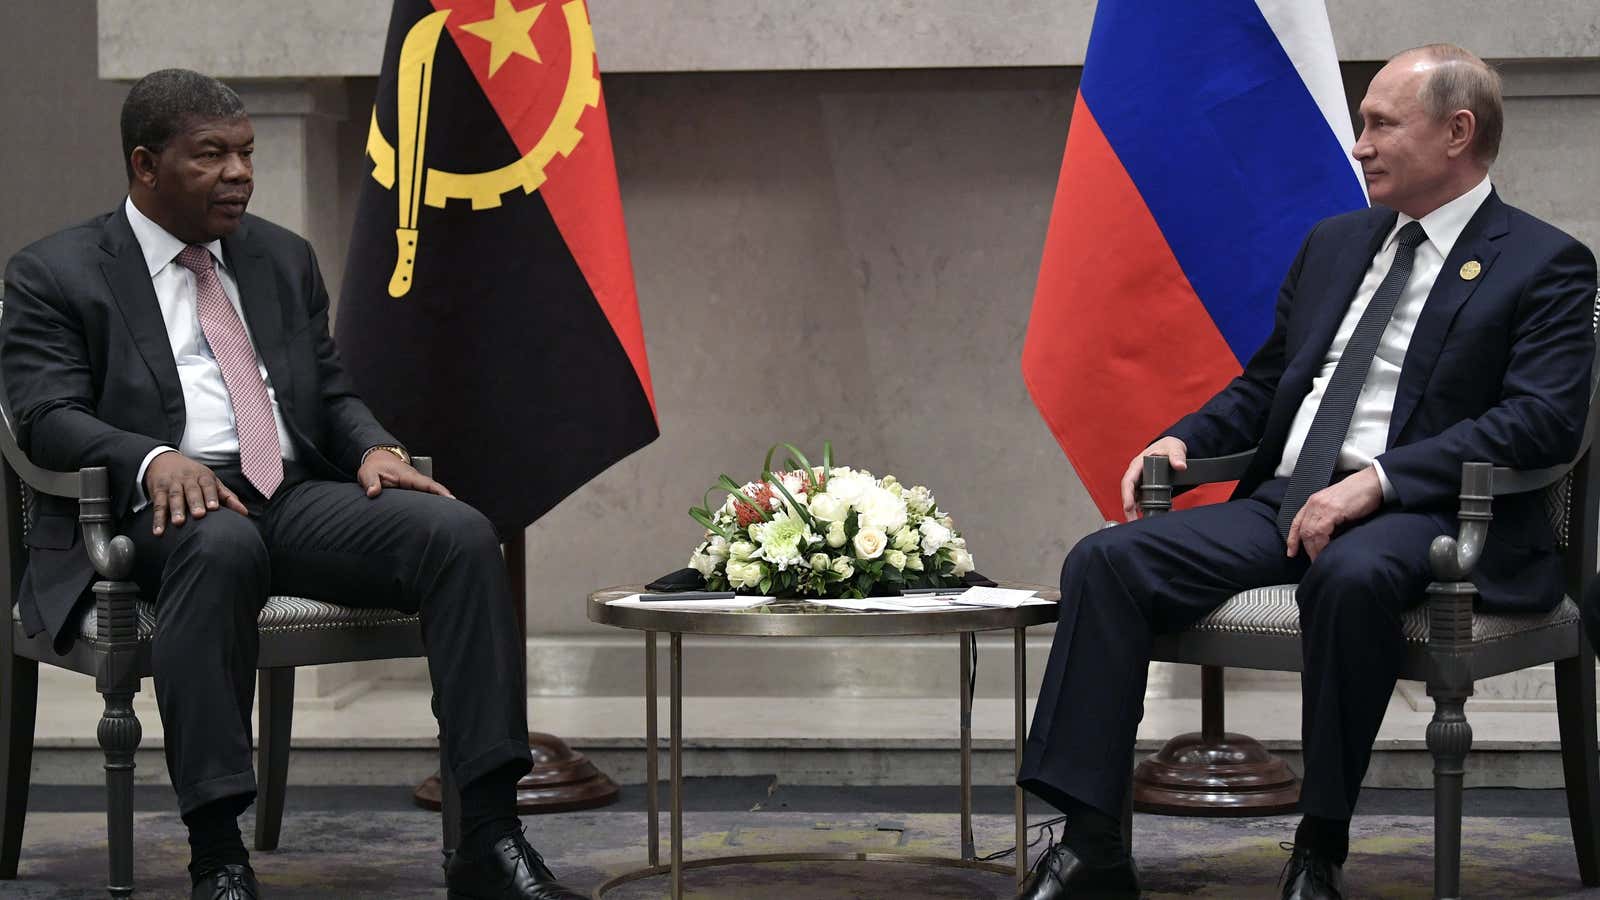 Russia’s President Vladimir Putin (R) meets with Angola’s President Joao Lourenco on the sidelines of the BRICS summit in Johannesburg, South Africa July 26, 2018.